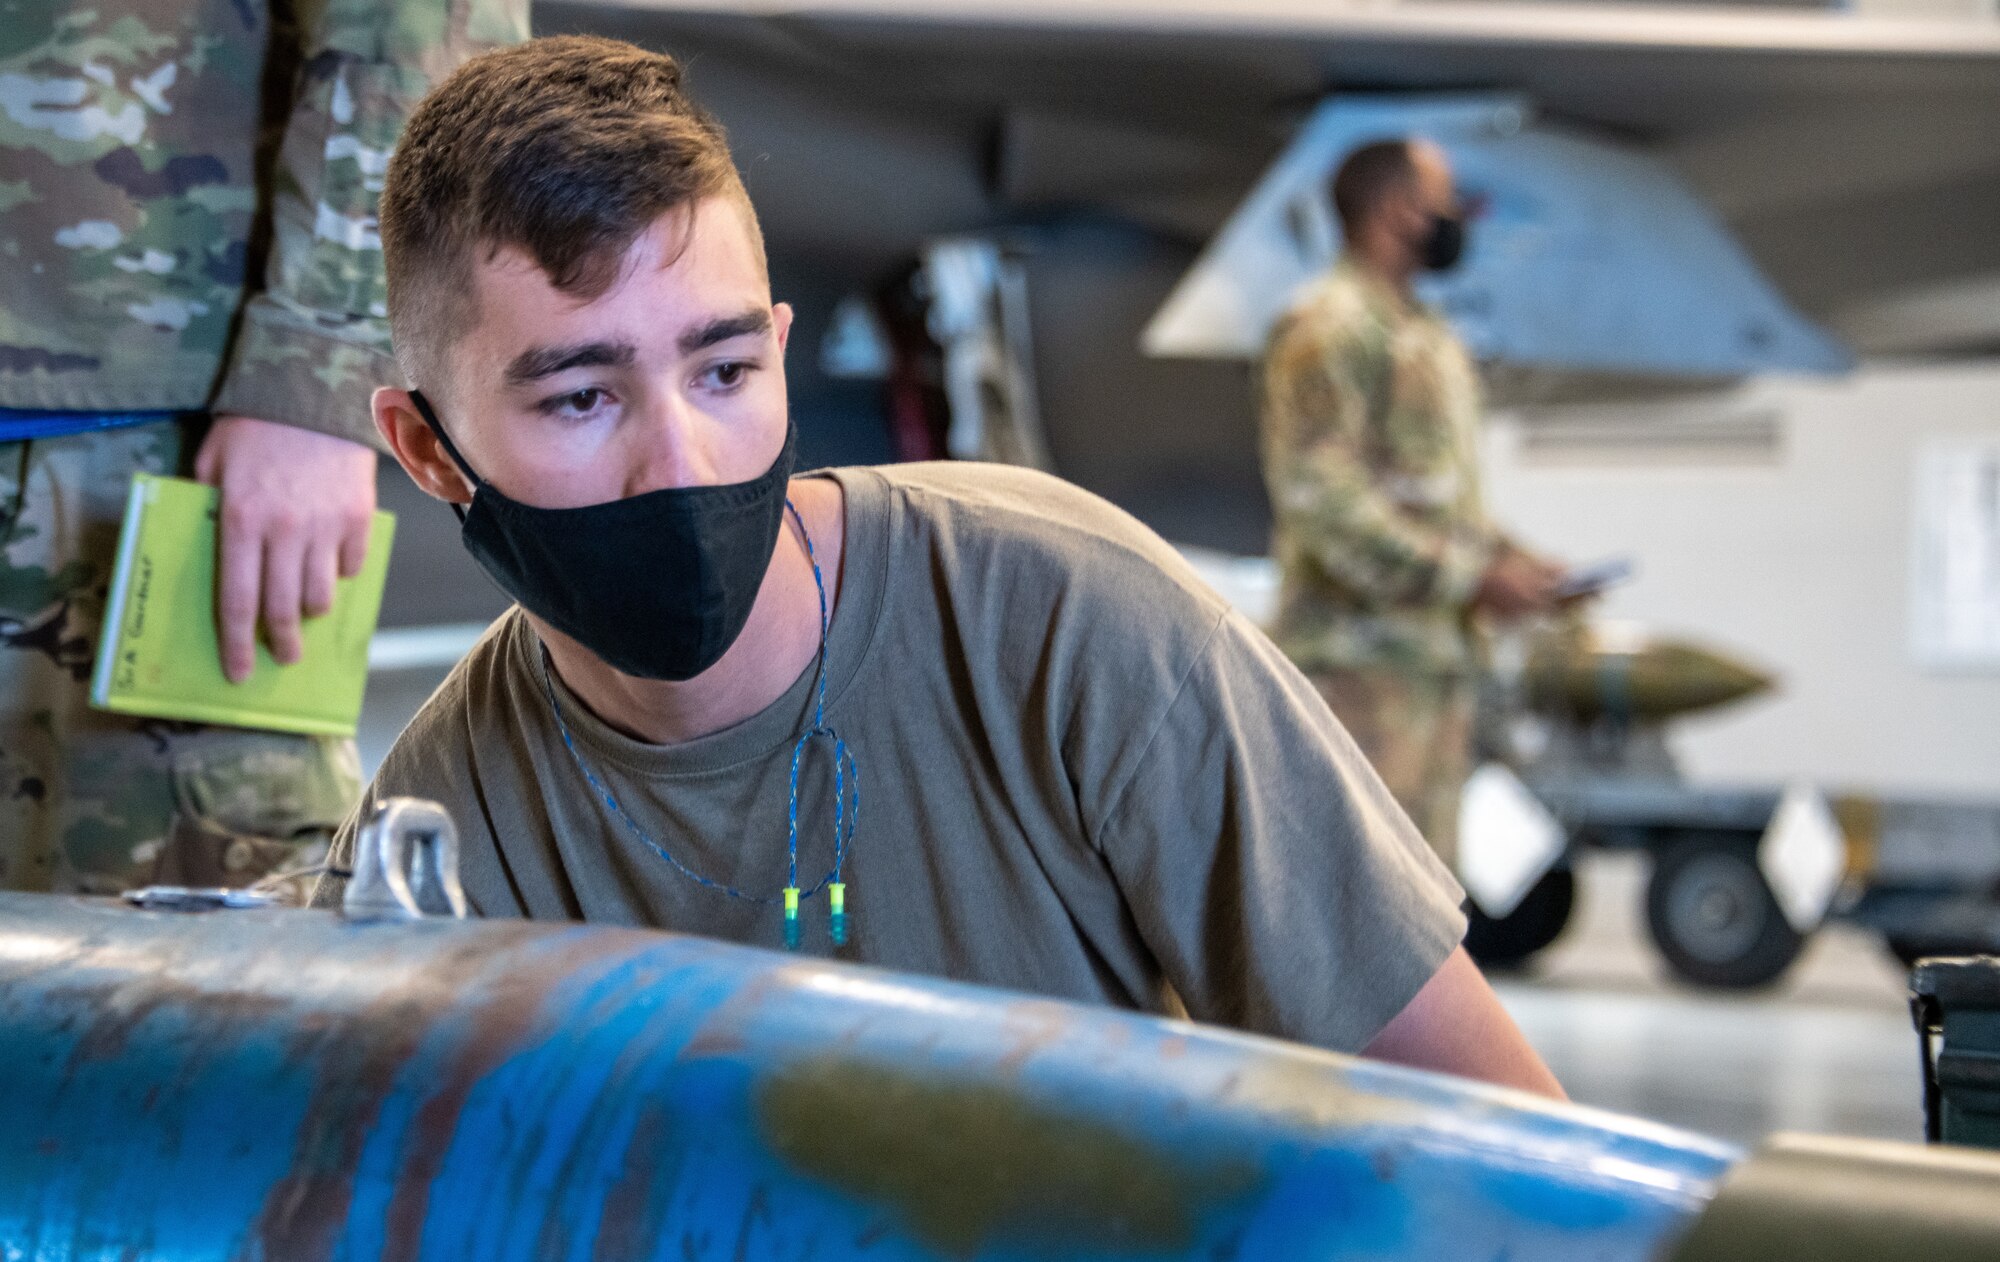 U.S. Air Force Staff Sgt. Connor Hansen from the 419th Aircraft Maintenance Squadron inspects an unarmed GBU-12 Pave Way bomb during a weapons load competition at Hill Air Force Base, Utah on Sept. 24, 2021. The quarterly competition focuses on speed, accuracy and safety, and ensures standard loading procedures and proficiency across the wings. (U.S. Air Force photo by Senior Airman Erica Webster)